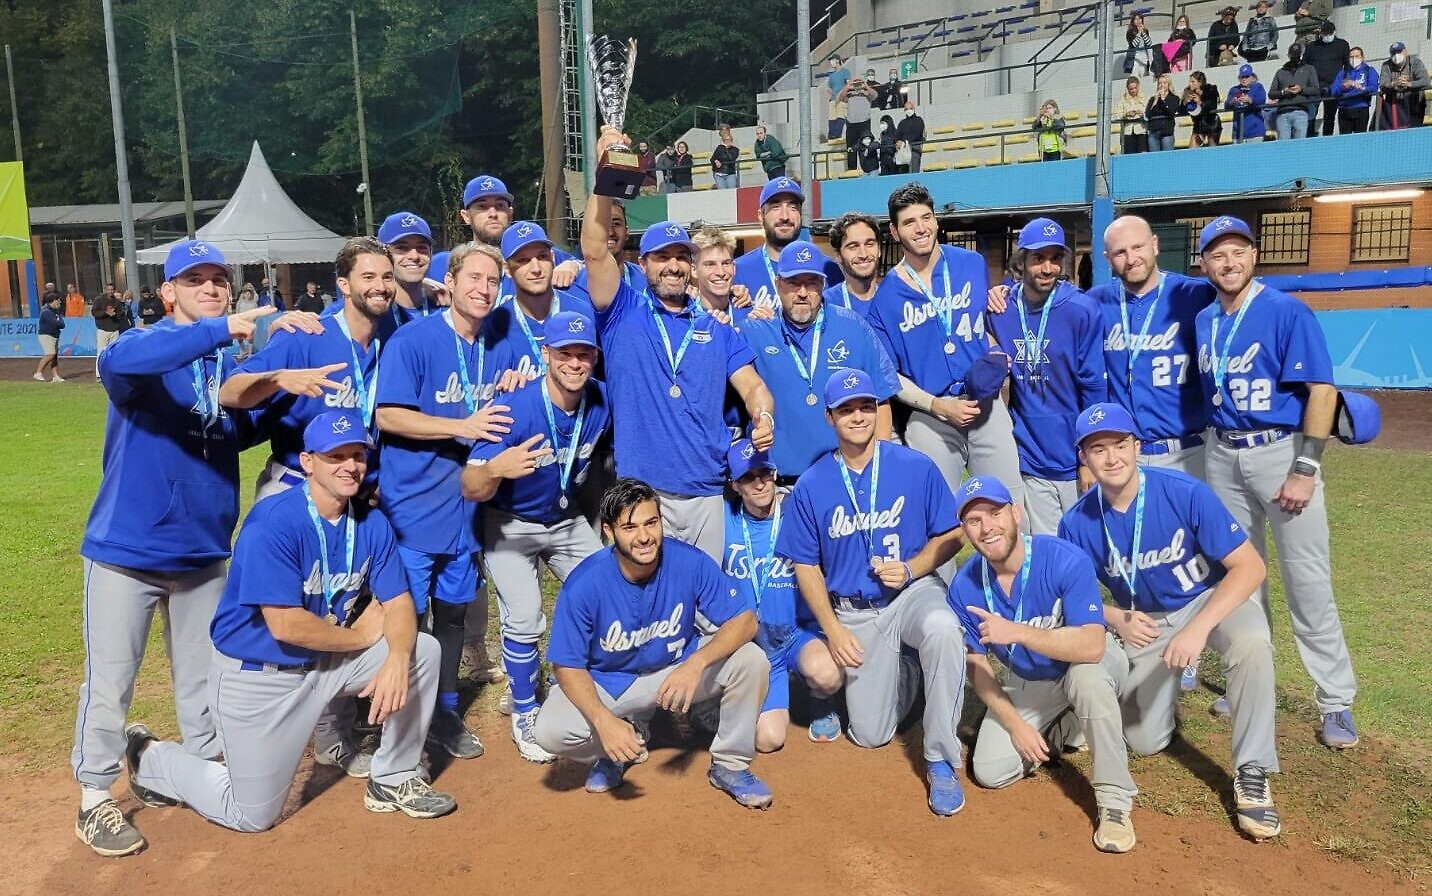 Team Israel is playing in the 2023 World Baseball Classic. Here's